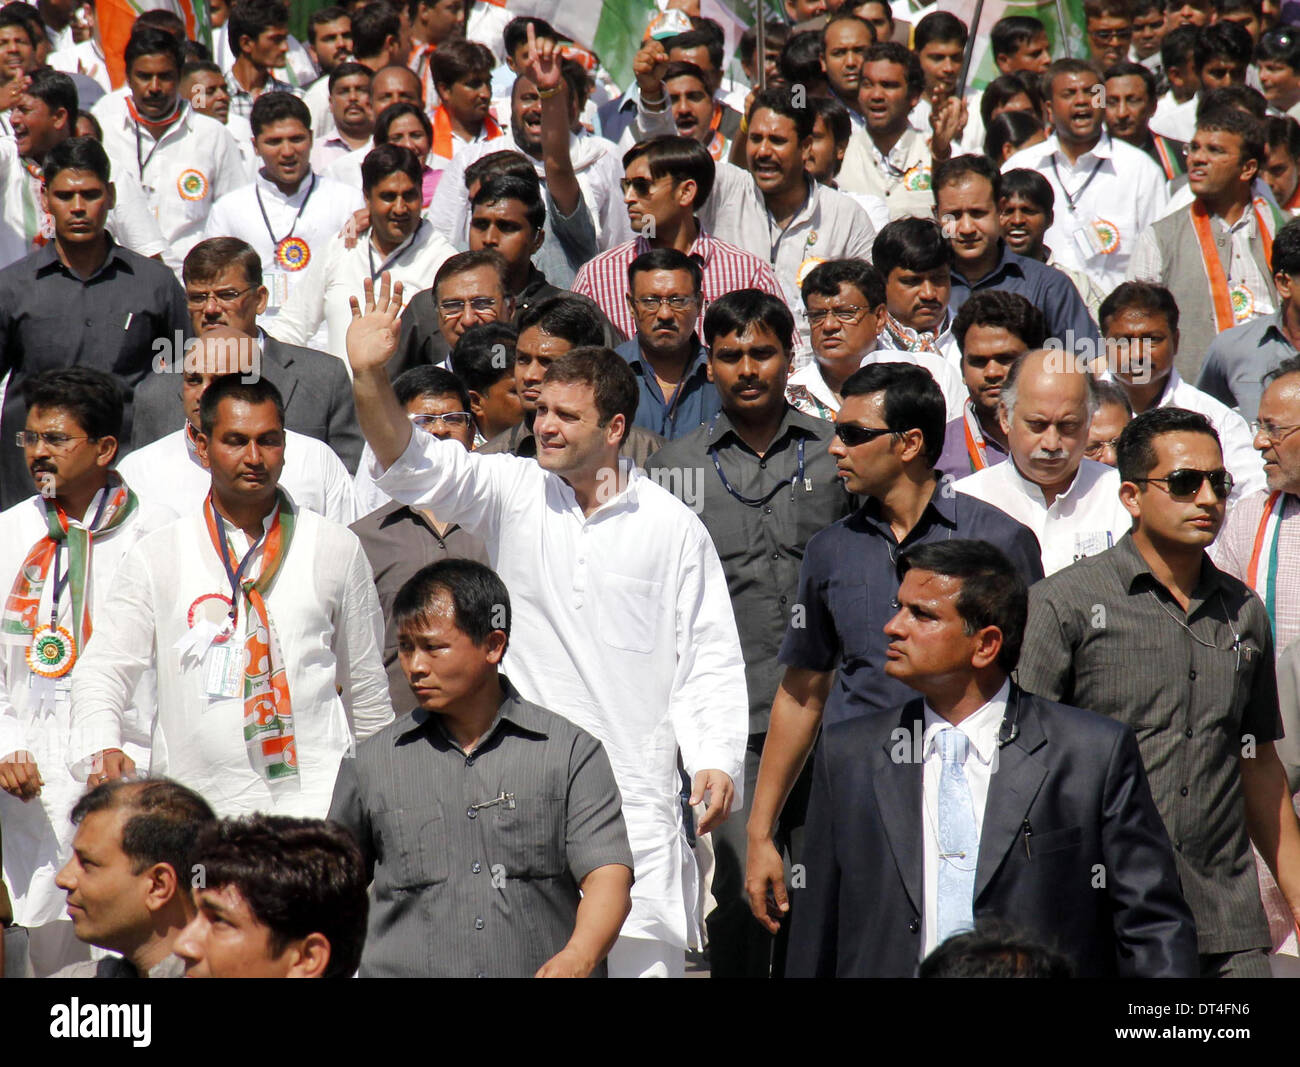 Bardoli, Gujarat. 8th Feb, 2014. Congress Party Vice President Rahul Gandhi waves towards supporters during a rally named the Vikas Khoj Yatra or Development Search March, at Bardoli, nearly 35 km from Ahmedabad, Gujarat, on Feb. 8, 2014. The march was organized by youth congress unit of Gujarat state to communicate with people and to verify state government's claims of development. Credit:  Stringer/Xinhua/Alamy Live News Stock Photo